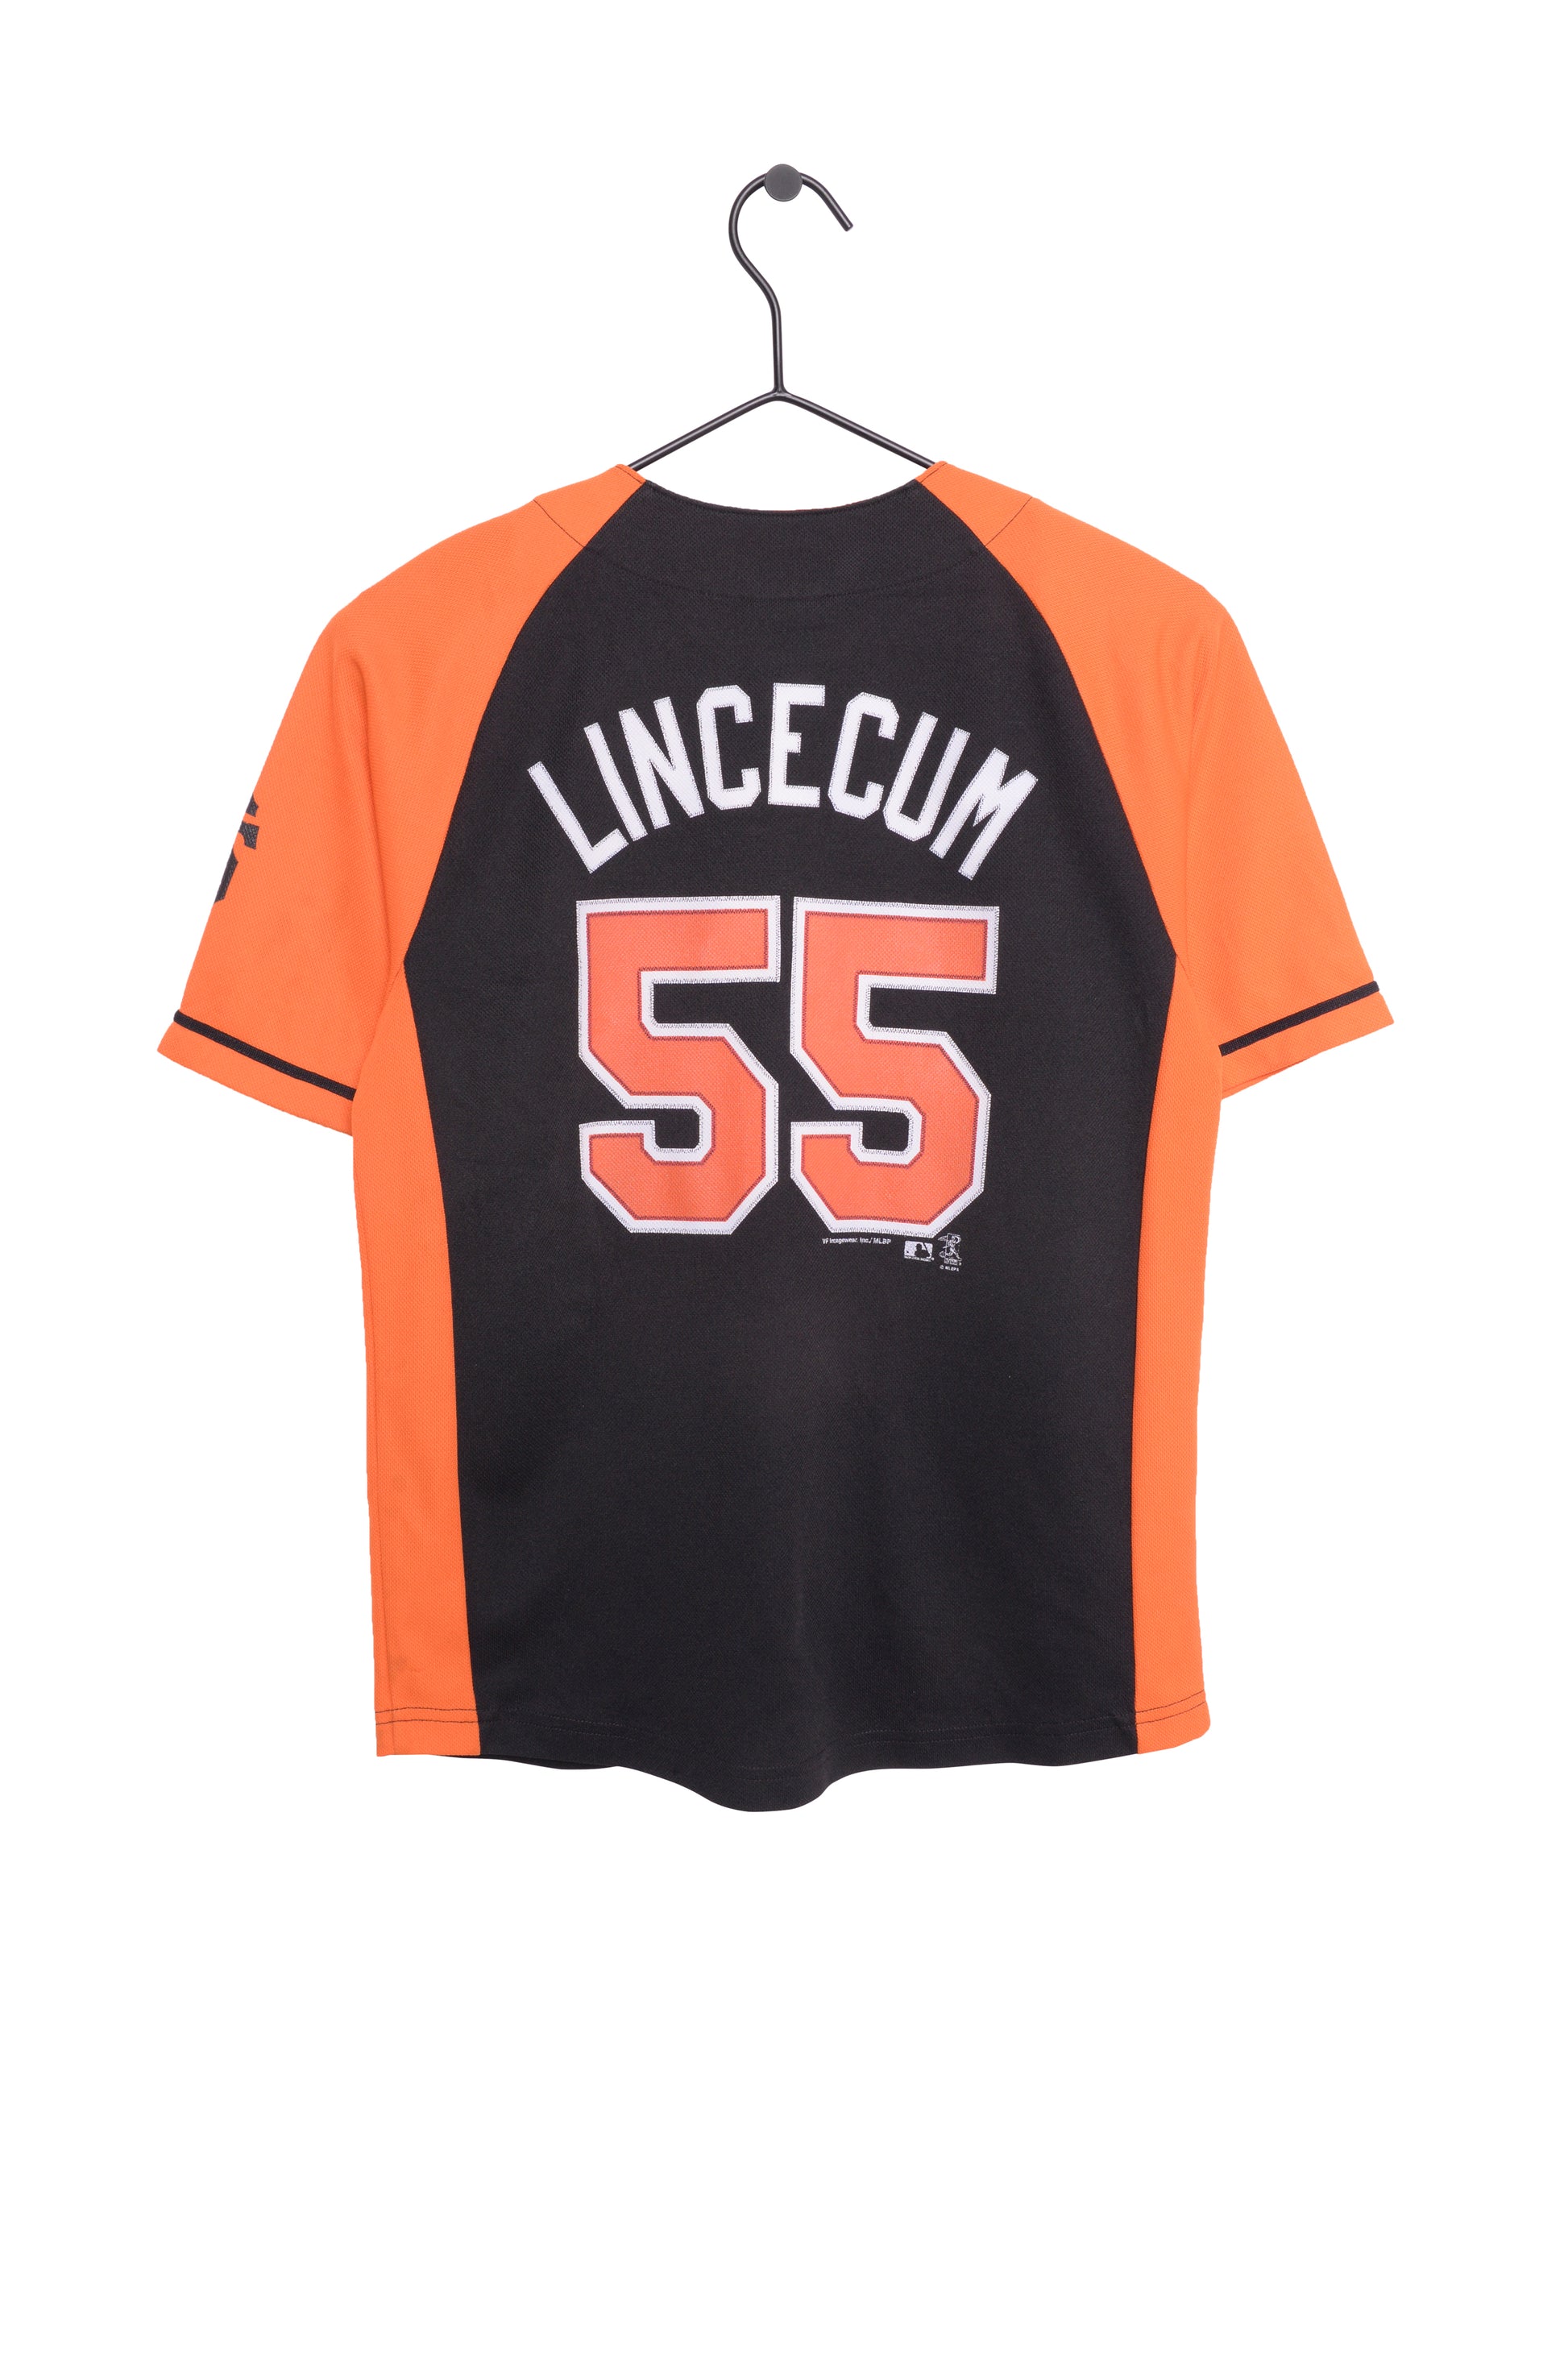 San Francisco Giants Throwback Jersey Extra-Small